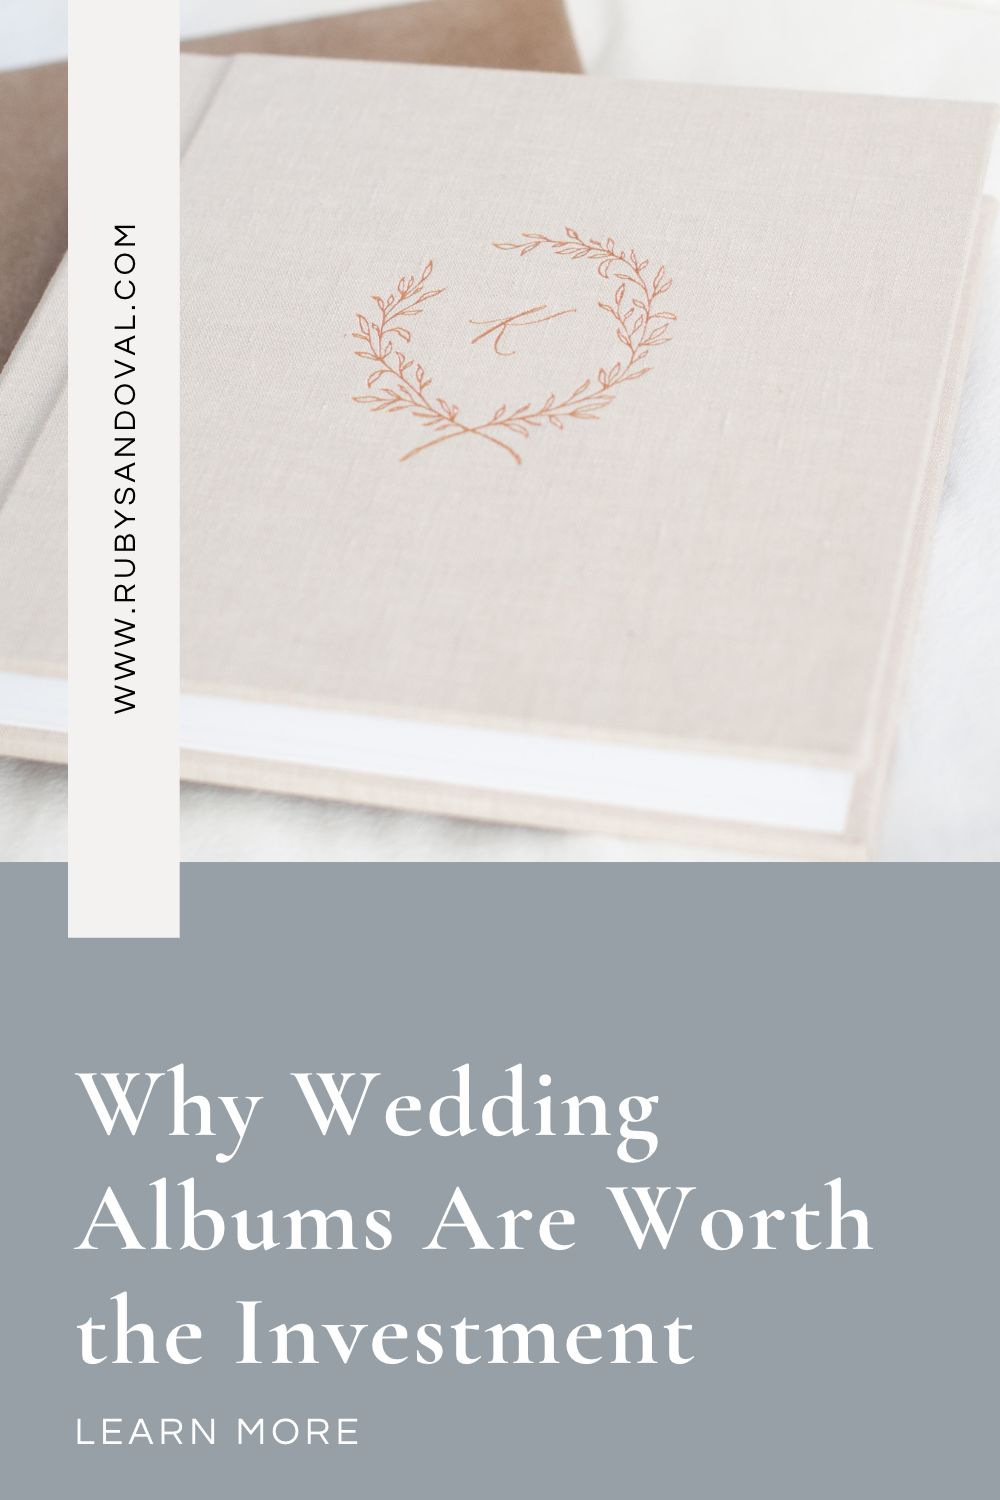 Why wedding albums are worth the investment Pin.